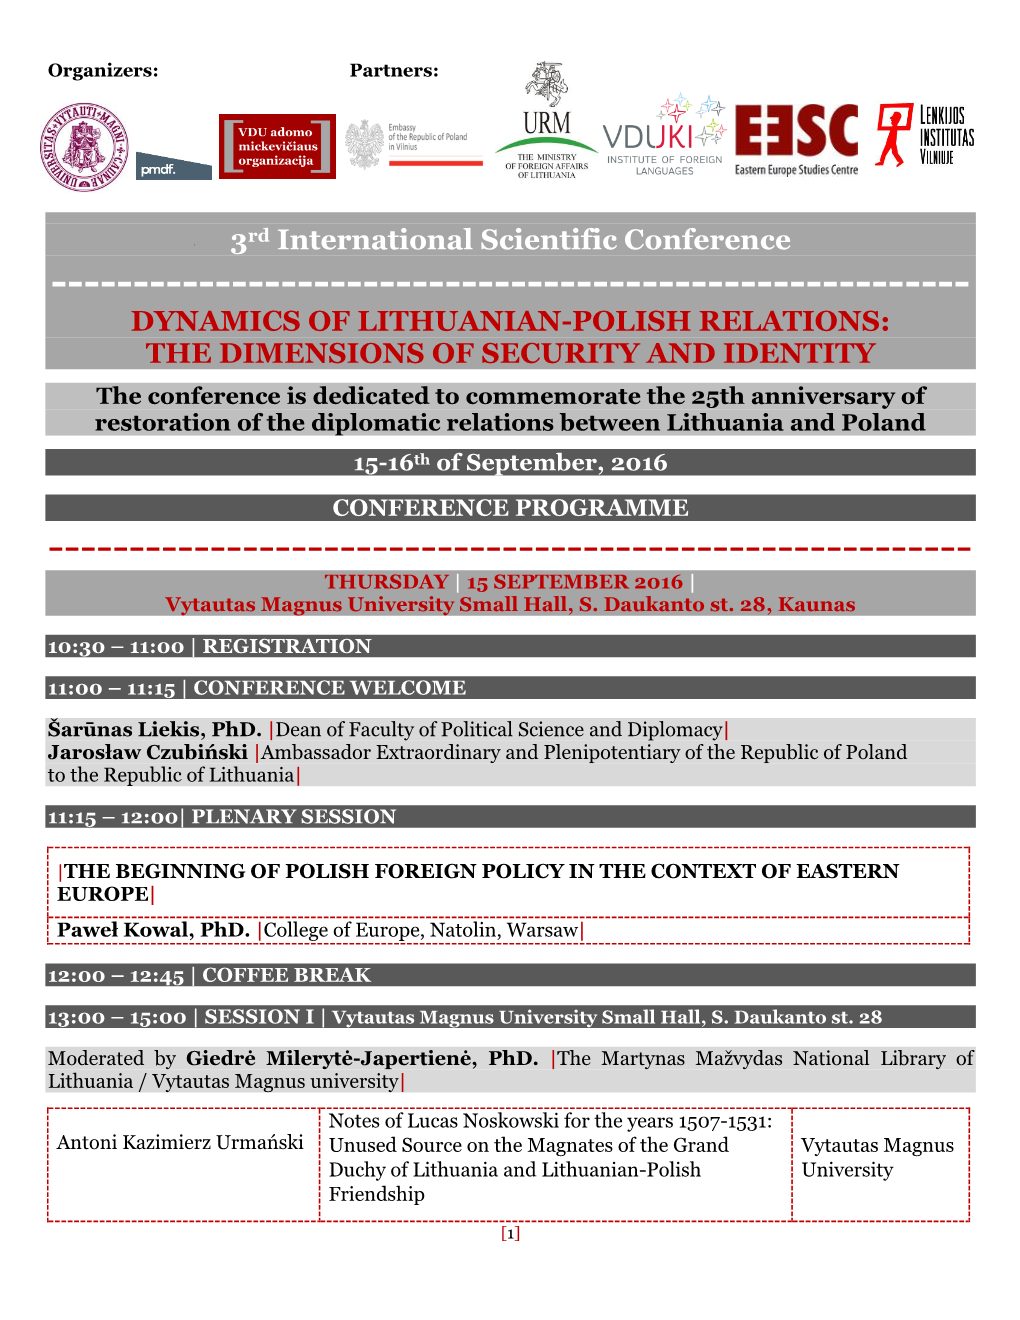 Conference ------DYNAMICS of LITHUANIAN-POLISH RELATIONS: the DIMENSIONS of SECURITY and IDENTITY